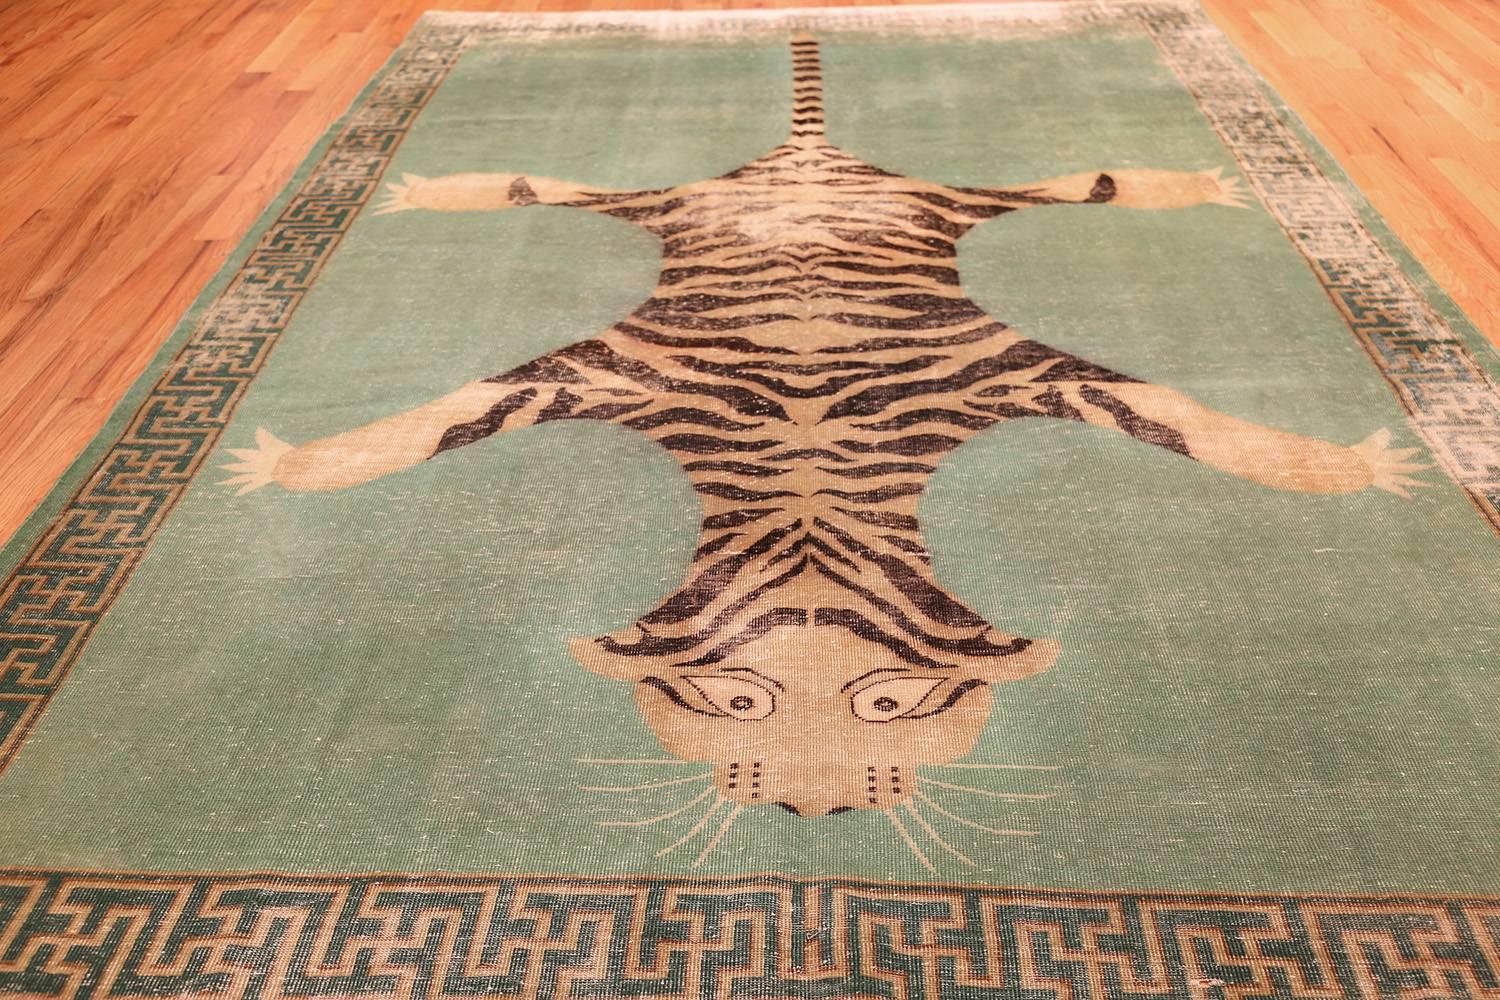 Beautiful shabby chic tiger design antique Indian rug 49219, country of origin / rug type: Indian rug, circa 1920

Dia rugs. Below you can view our current collection of antique carpets and rugs from India.

Superfluous, flamboyant and elegant